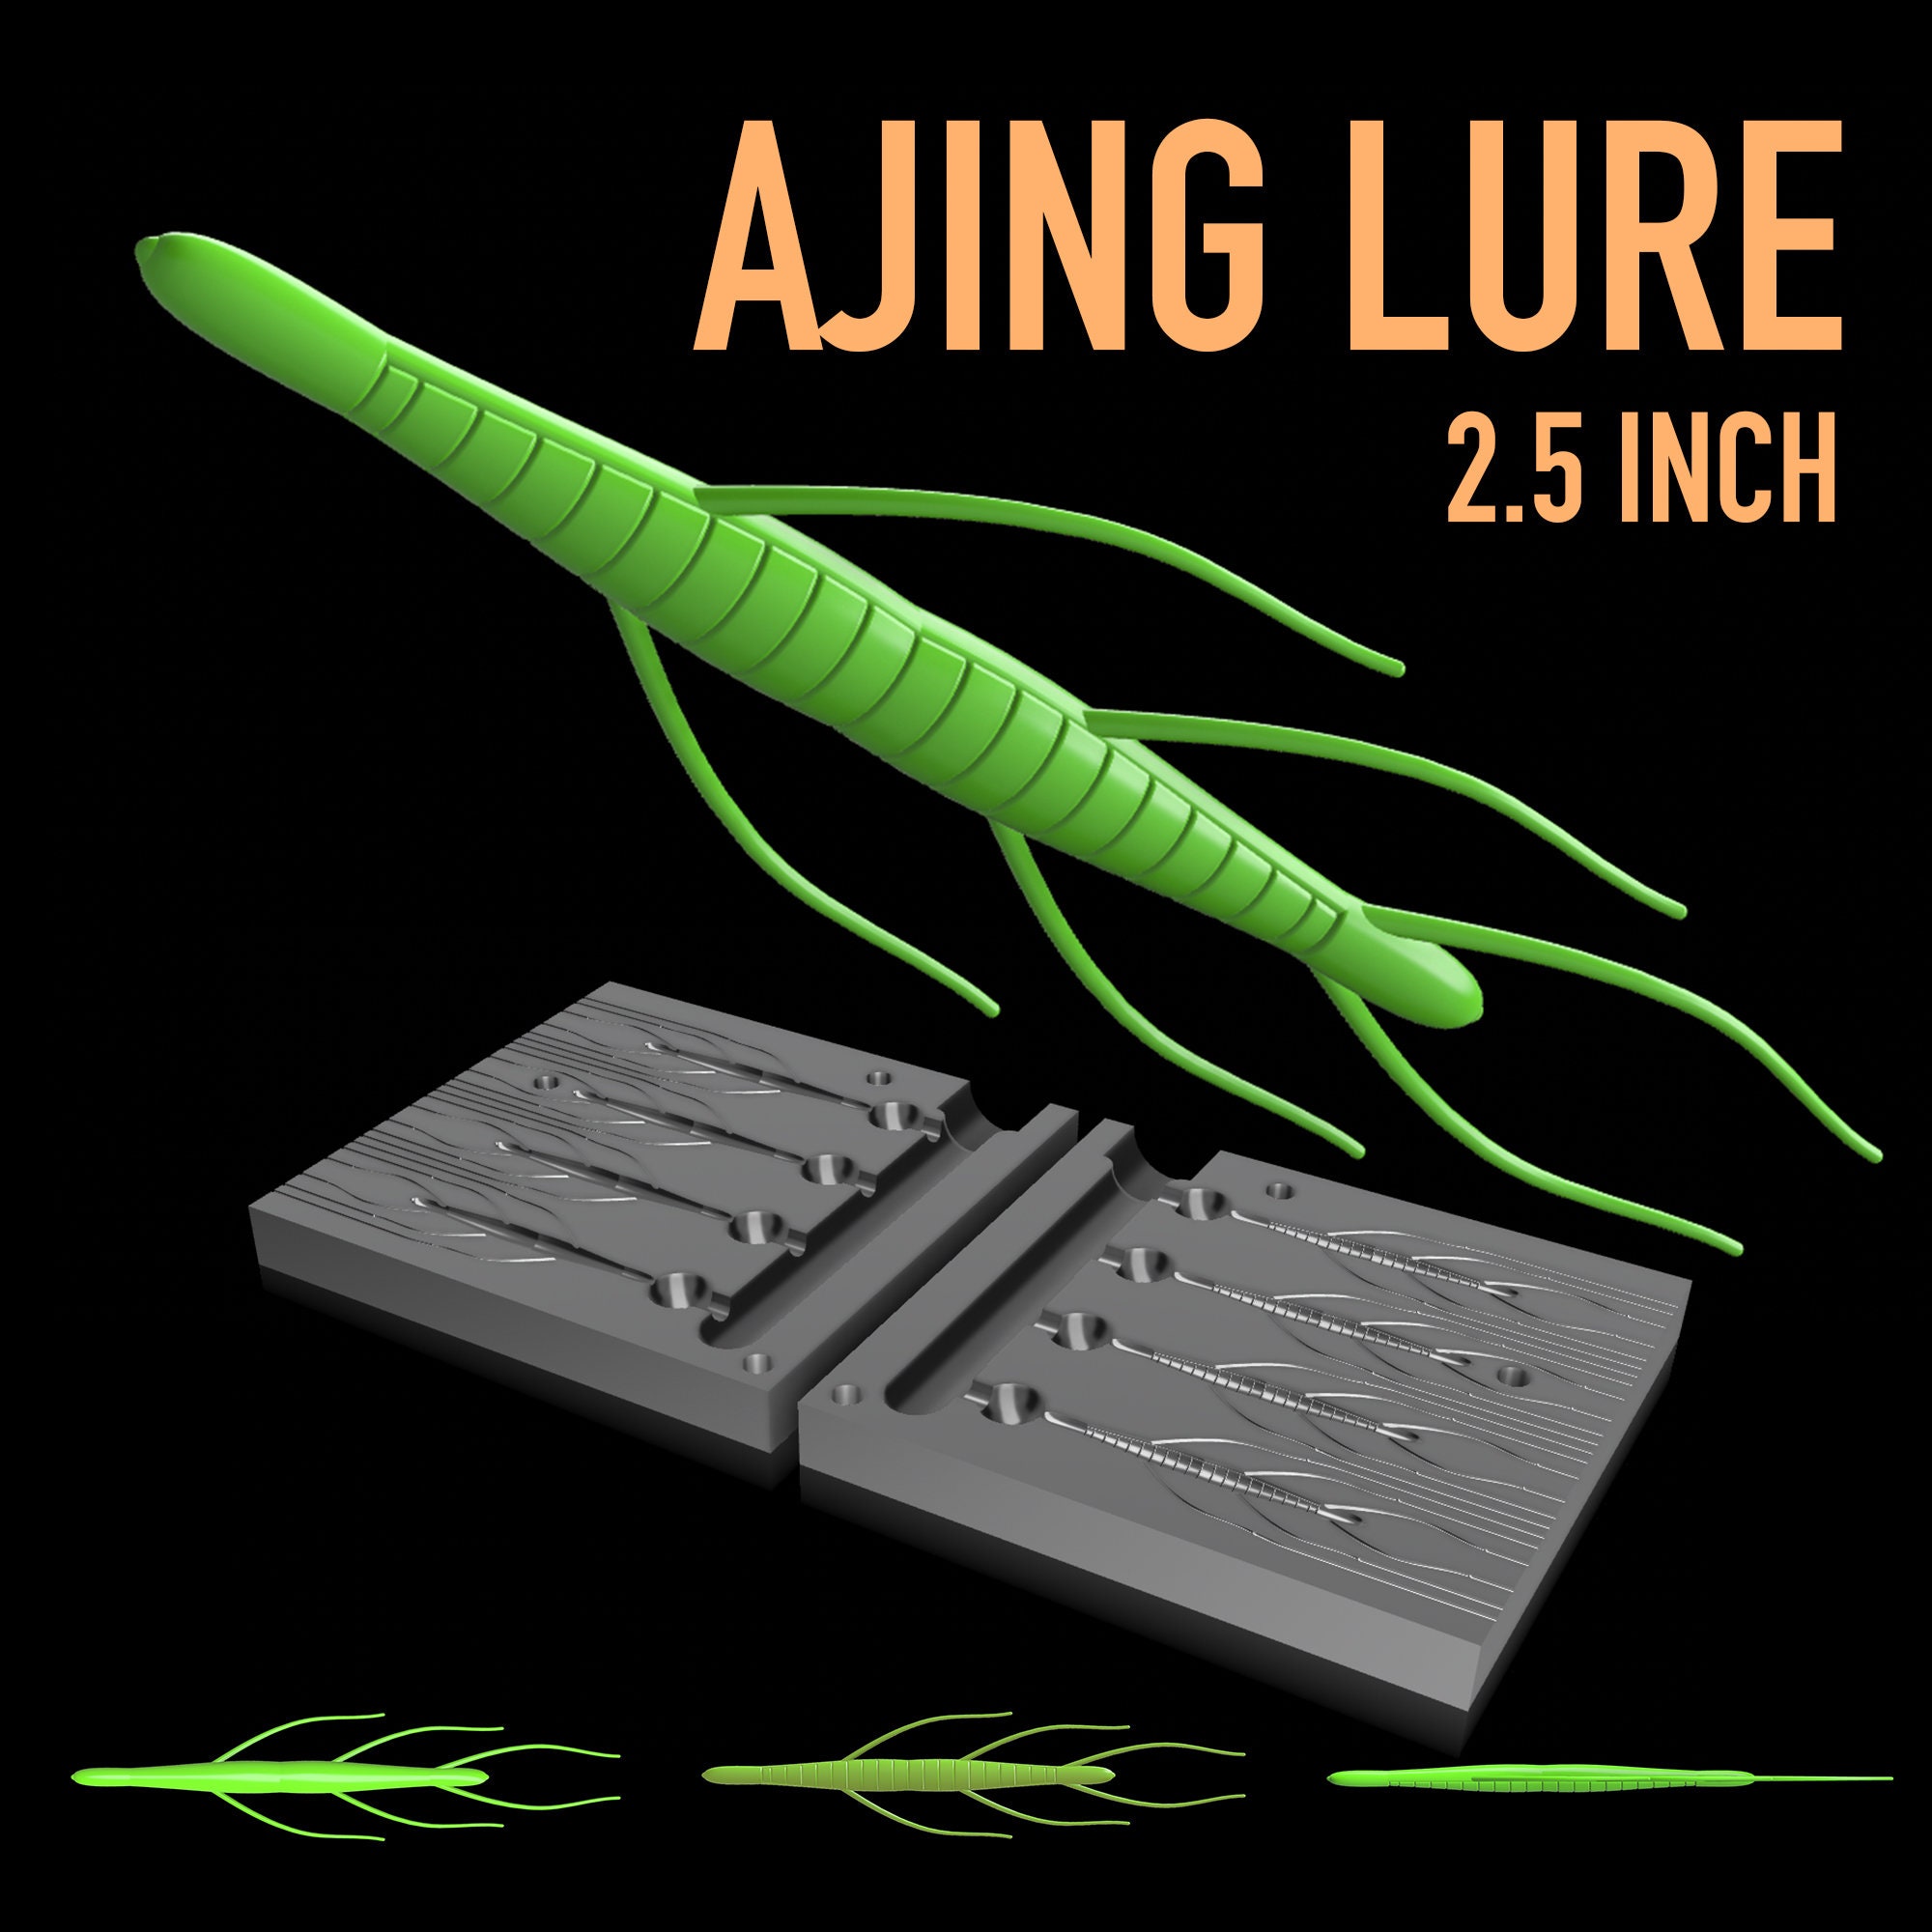 Digital File: Mold Ajing Lure 2.5 Inch STL, STEP, for 3d Print and